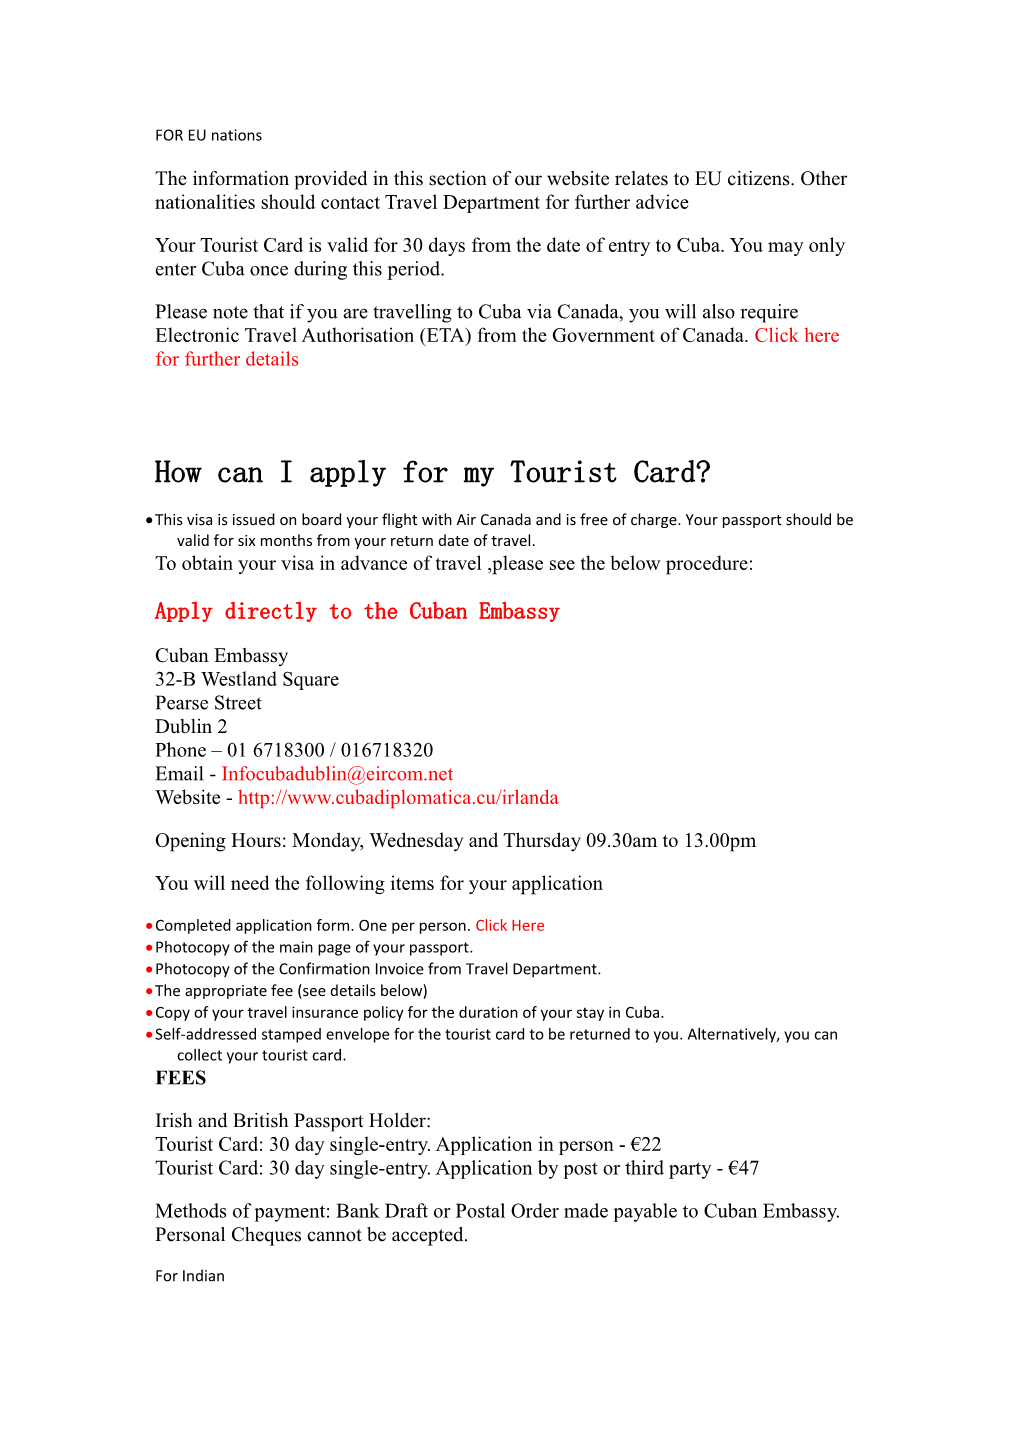 How Can I Apply for My Tourist Card?